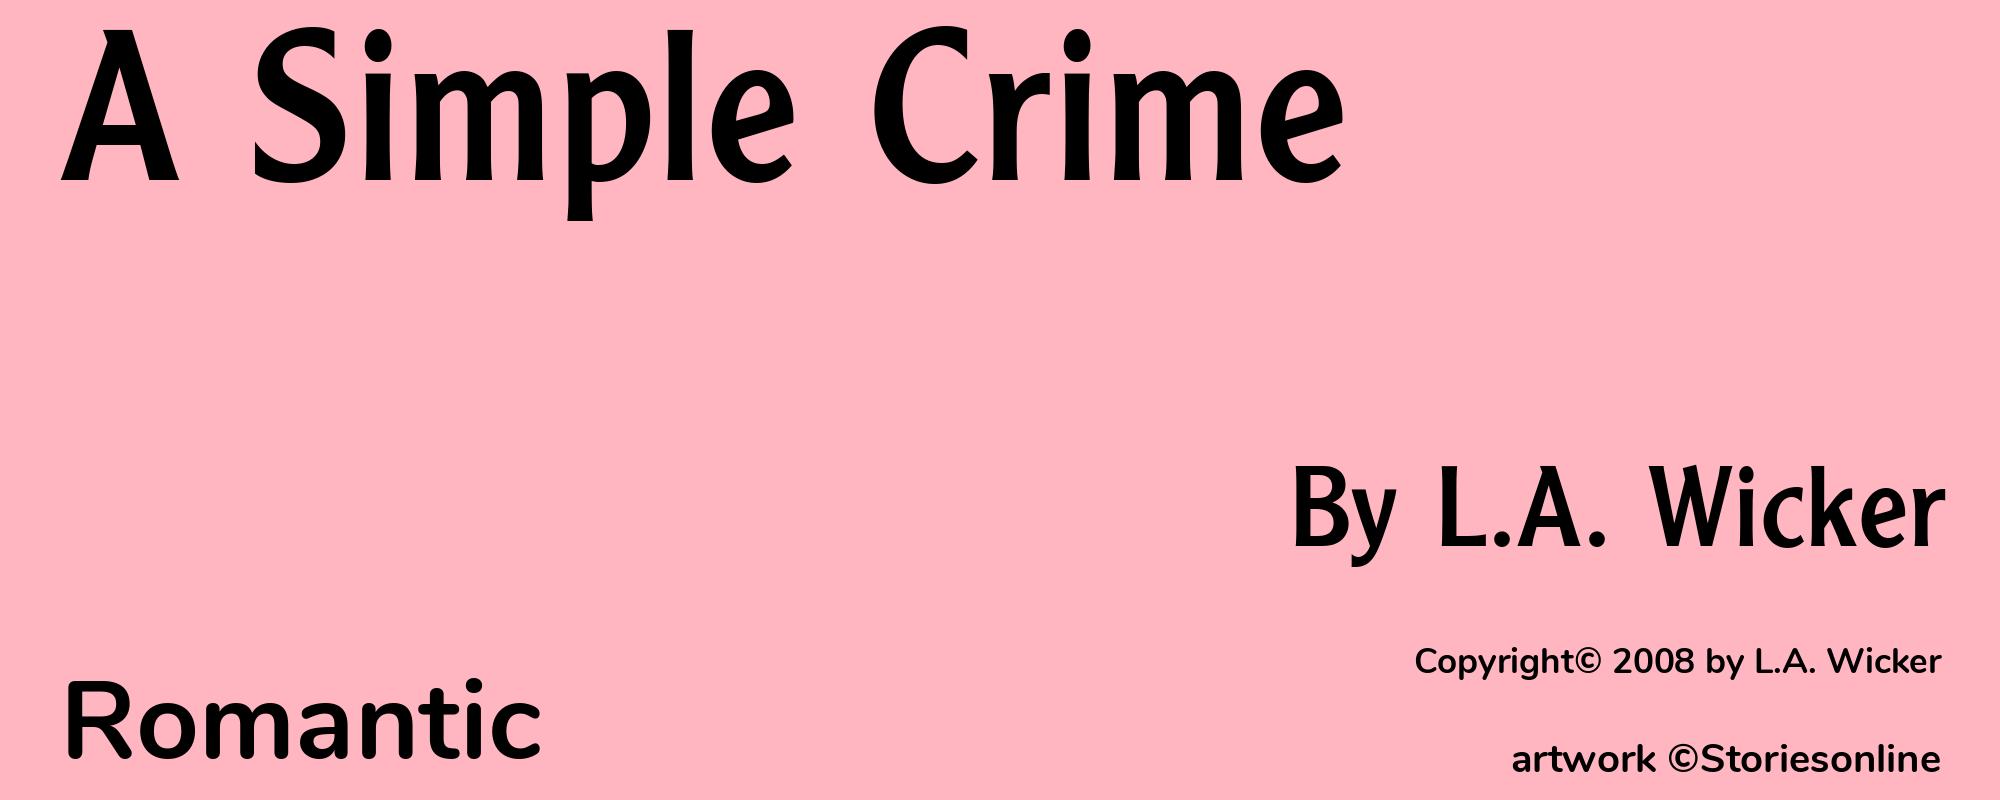 A Simple Crime - Cover